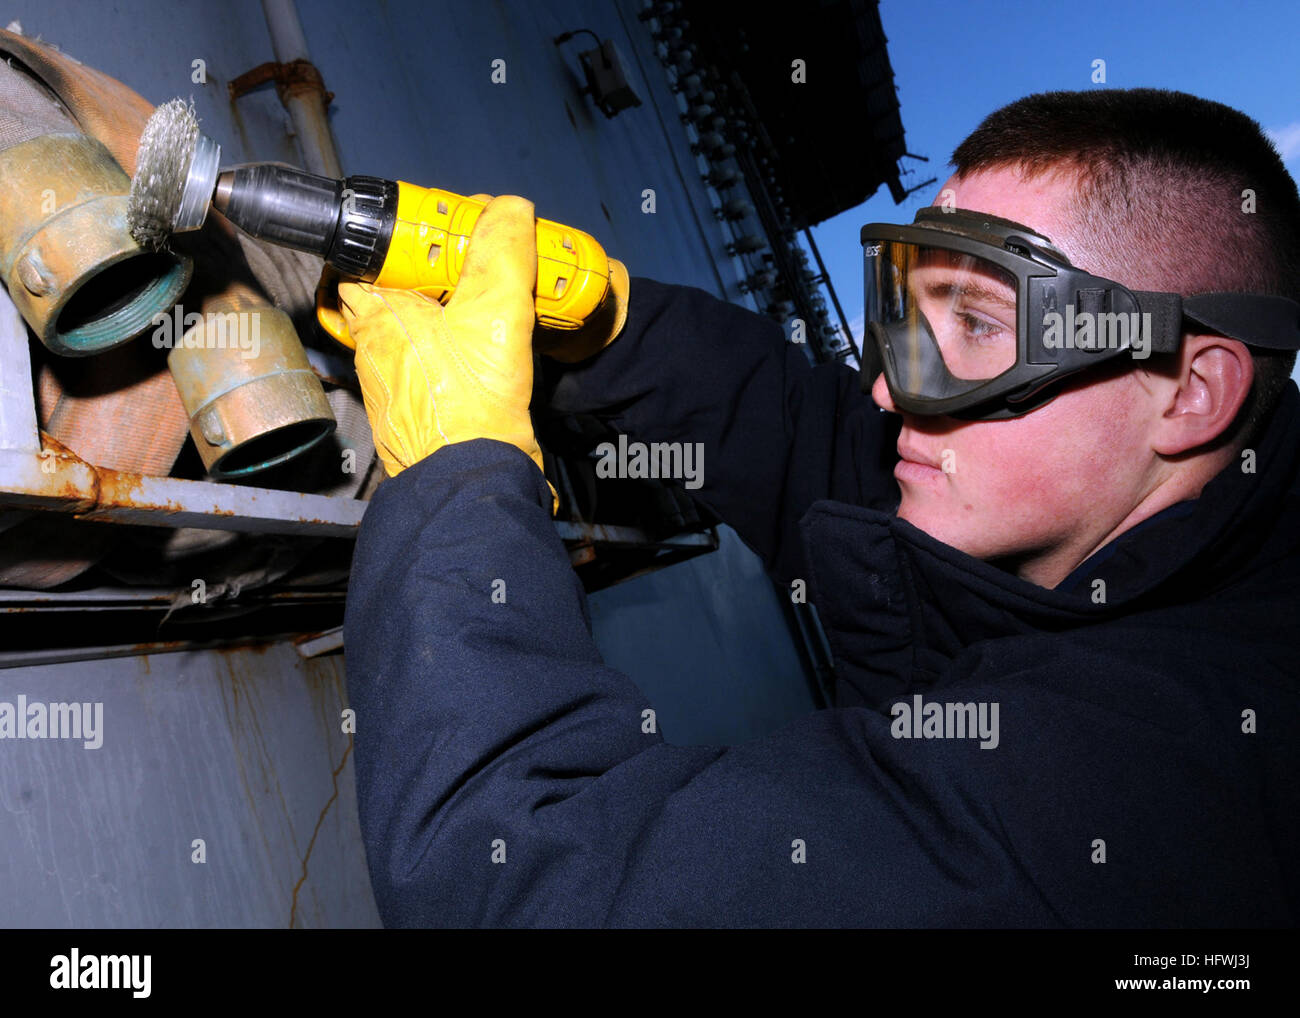 081201-N-9898L-068 PACIFIC OCEAN (Dec. 1, 2008) Aviation Boatswain's Mate Airman Mitchell Larson, from Nampa, Idaho, removes corrosion from a fire hose on the flight deck of the Nimitz-class aircraft carrier USS Abraham Lincoln (CVN 72). Lincoln is conducting training and carrier qualifications. (U.S. Navy photo by Mass Communication Specialist 3rd Class Geoffrey Lewis/Released) US Navy 081201-N-9898L-068 viation Boatswain's Mate Airman Mitchell Larson removes corrosion from a fire hose Stock Photo